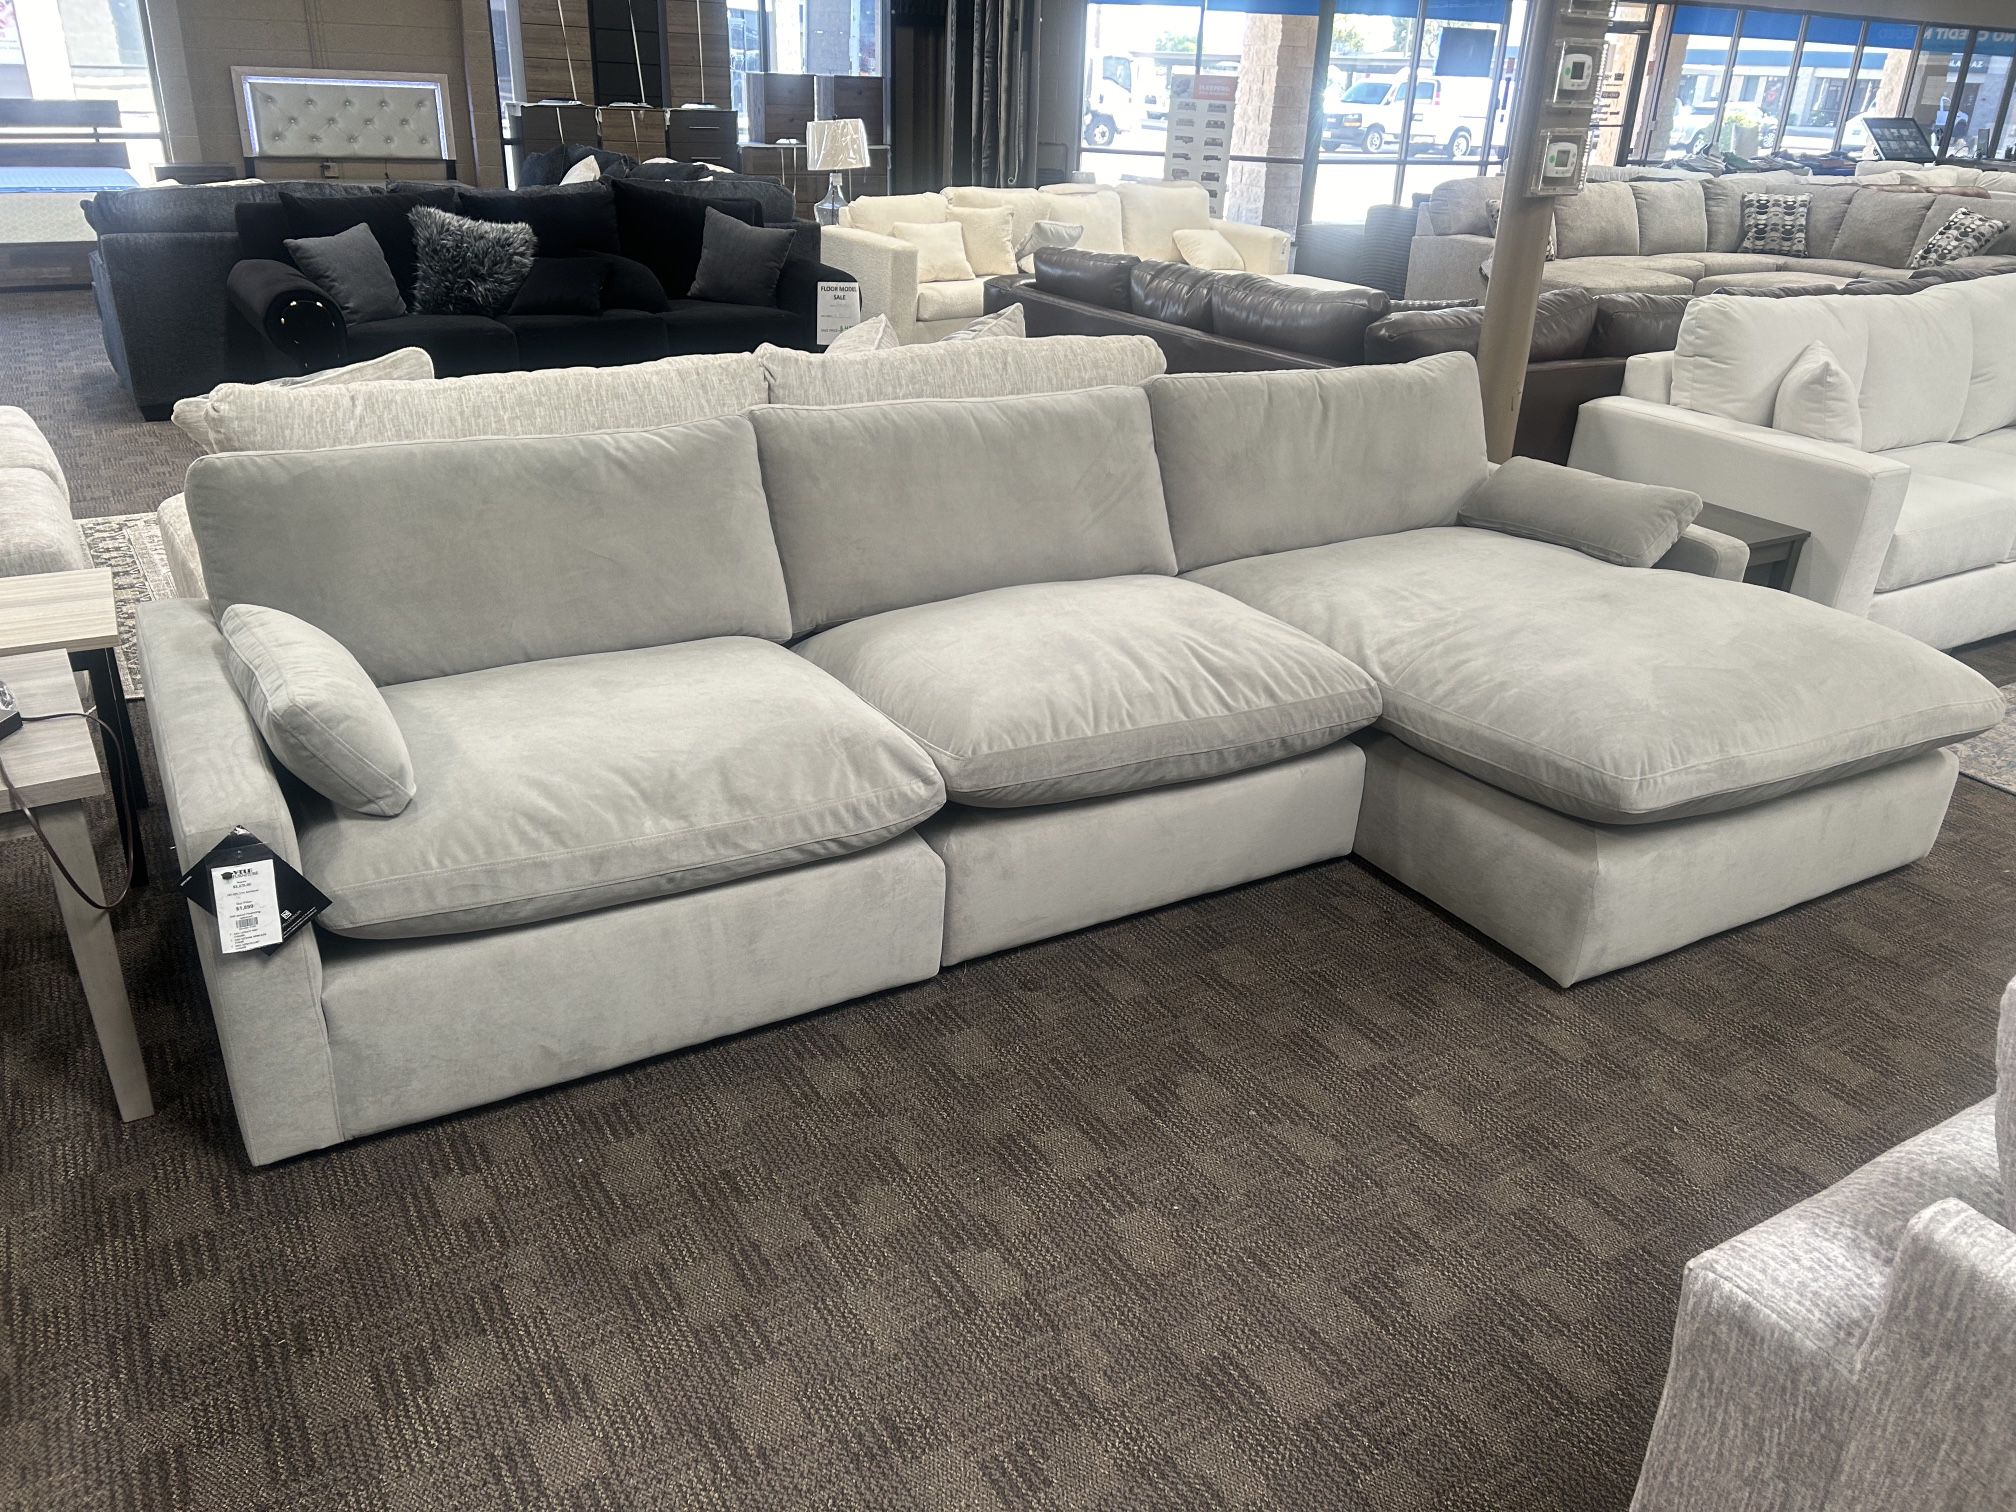 Grey Velvet Cloud Feather Sectional Couch 